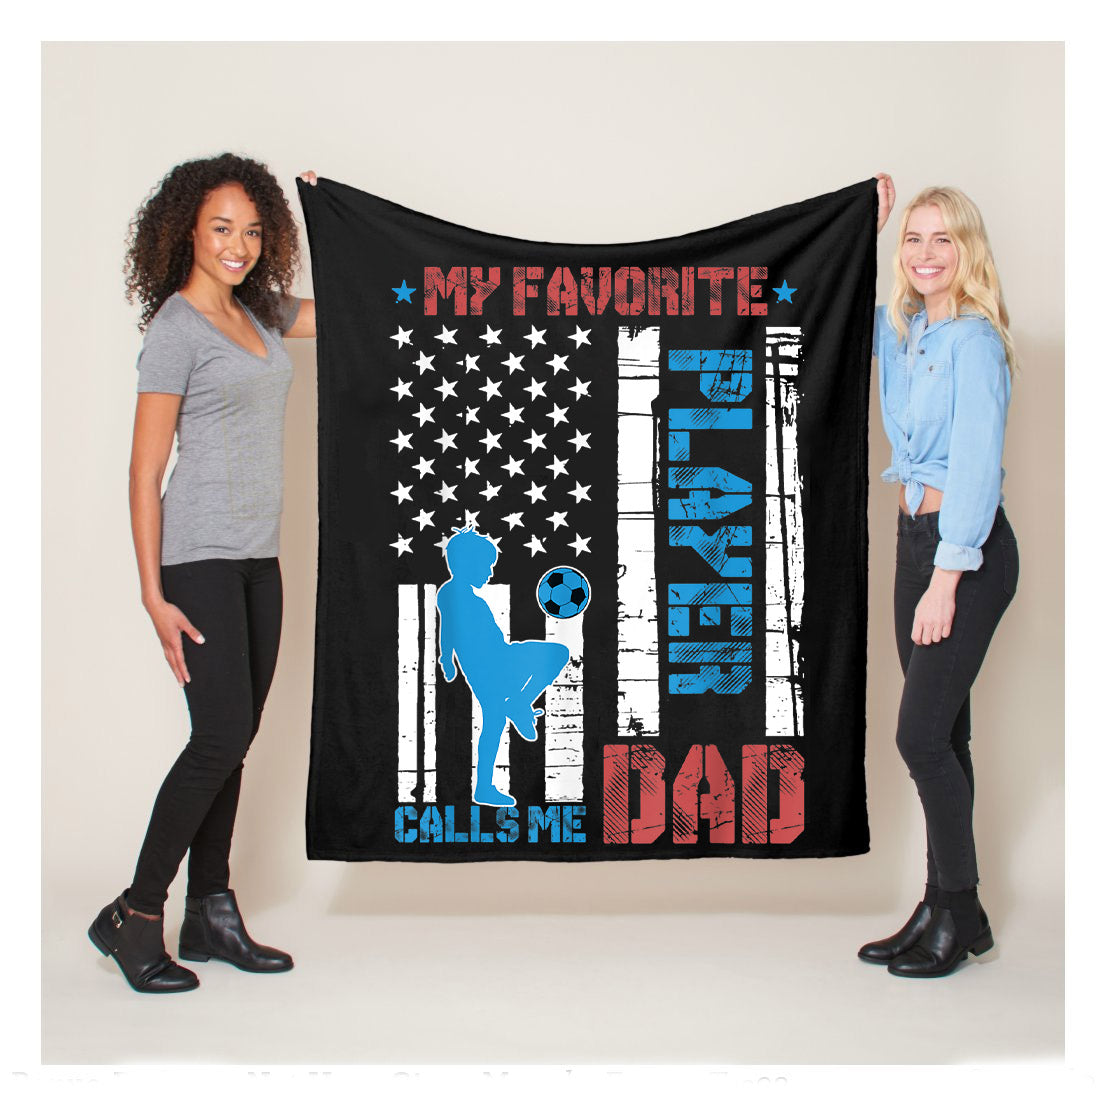 My Favorite Soccer Player Calls Me Dad Soccer Lovers Fleece Blanket,  Soccer Blankets, Soccer Gifts, Happy Fathers Day Gift Ideas For Dad